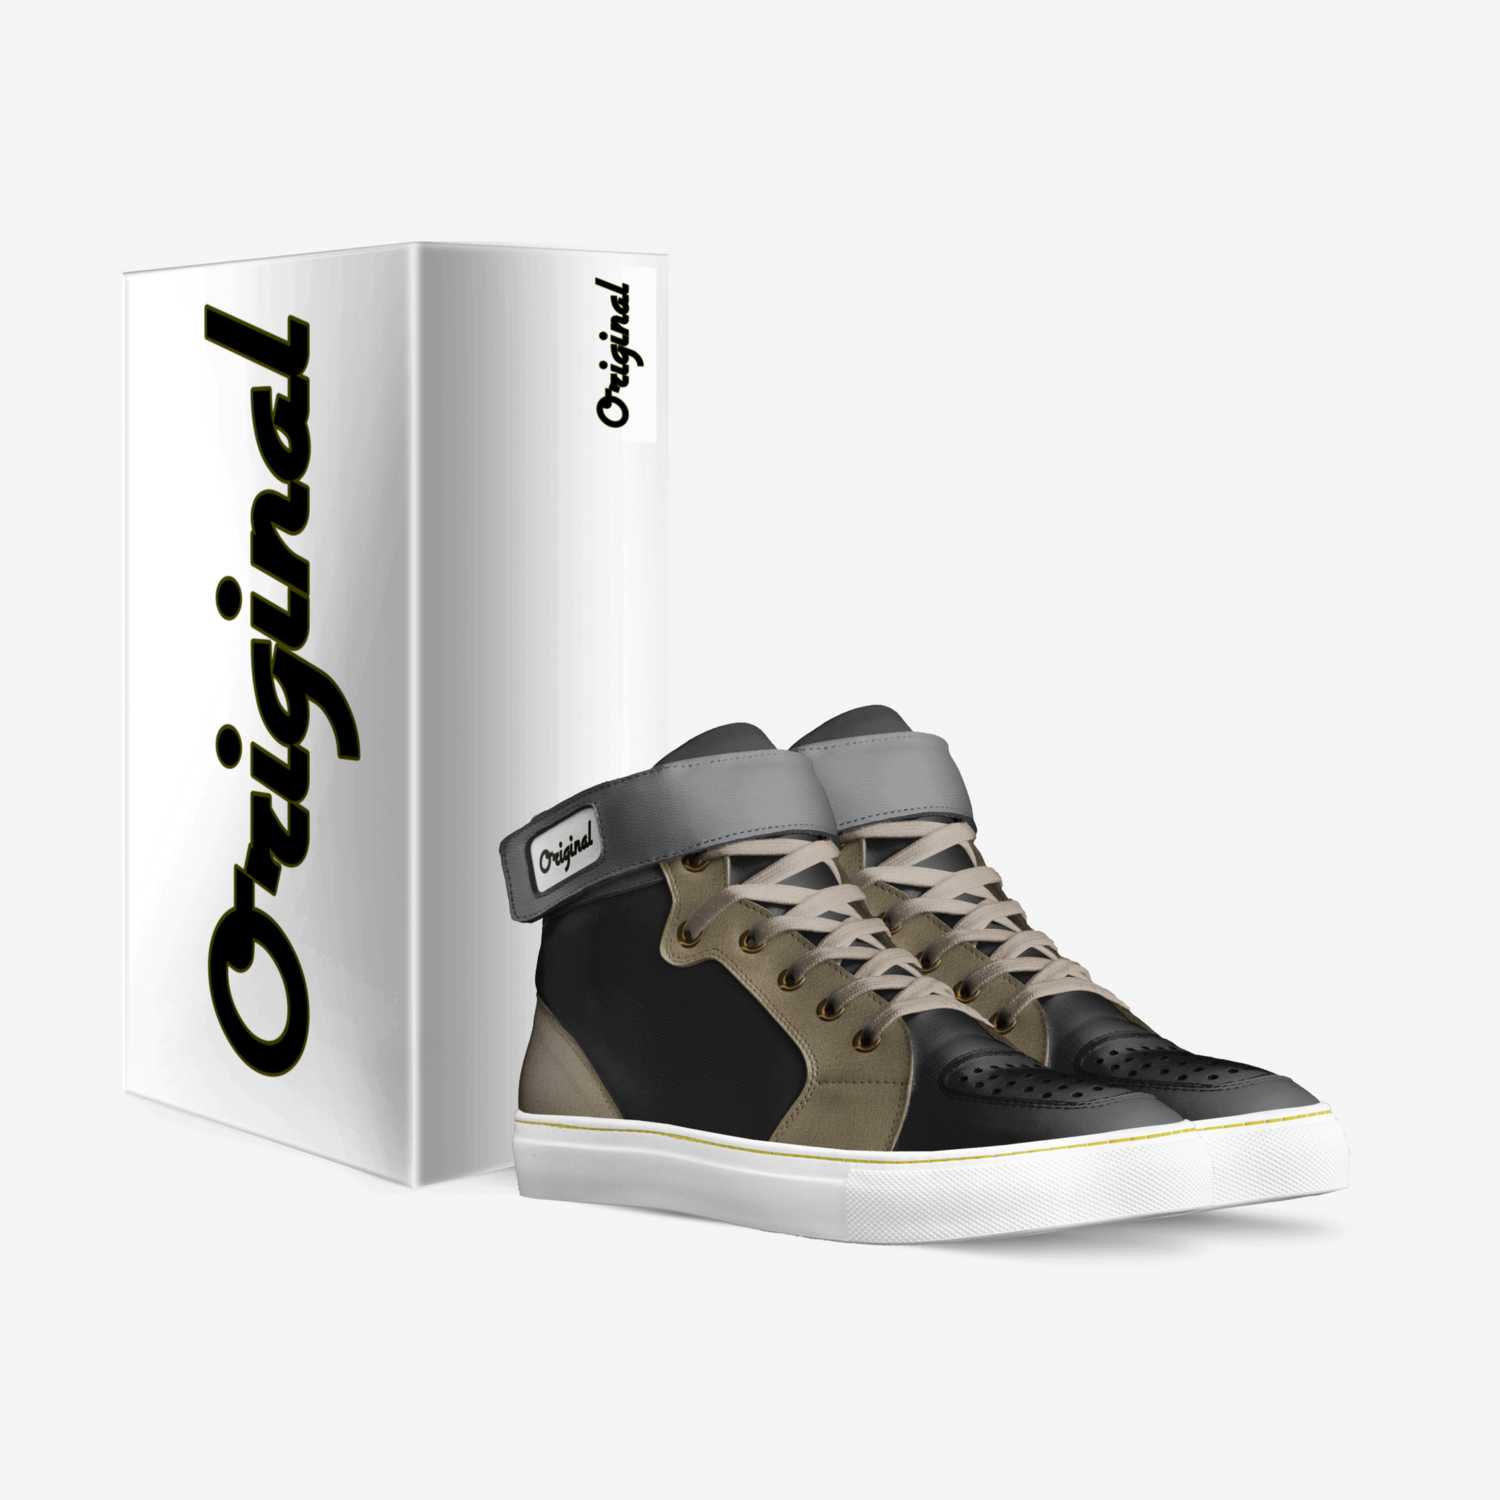 Original custom made in Italy shoes by Oof | Box view